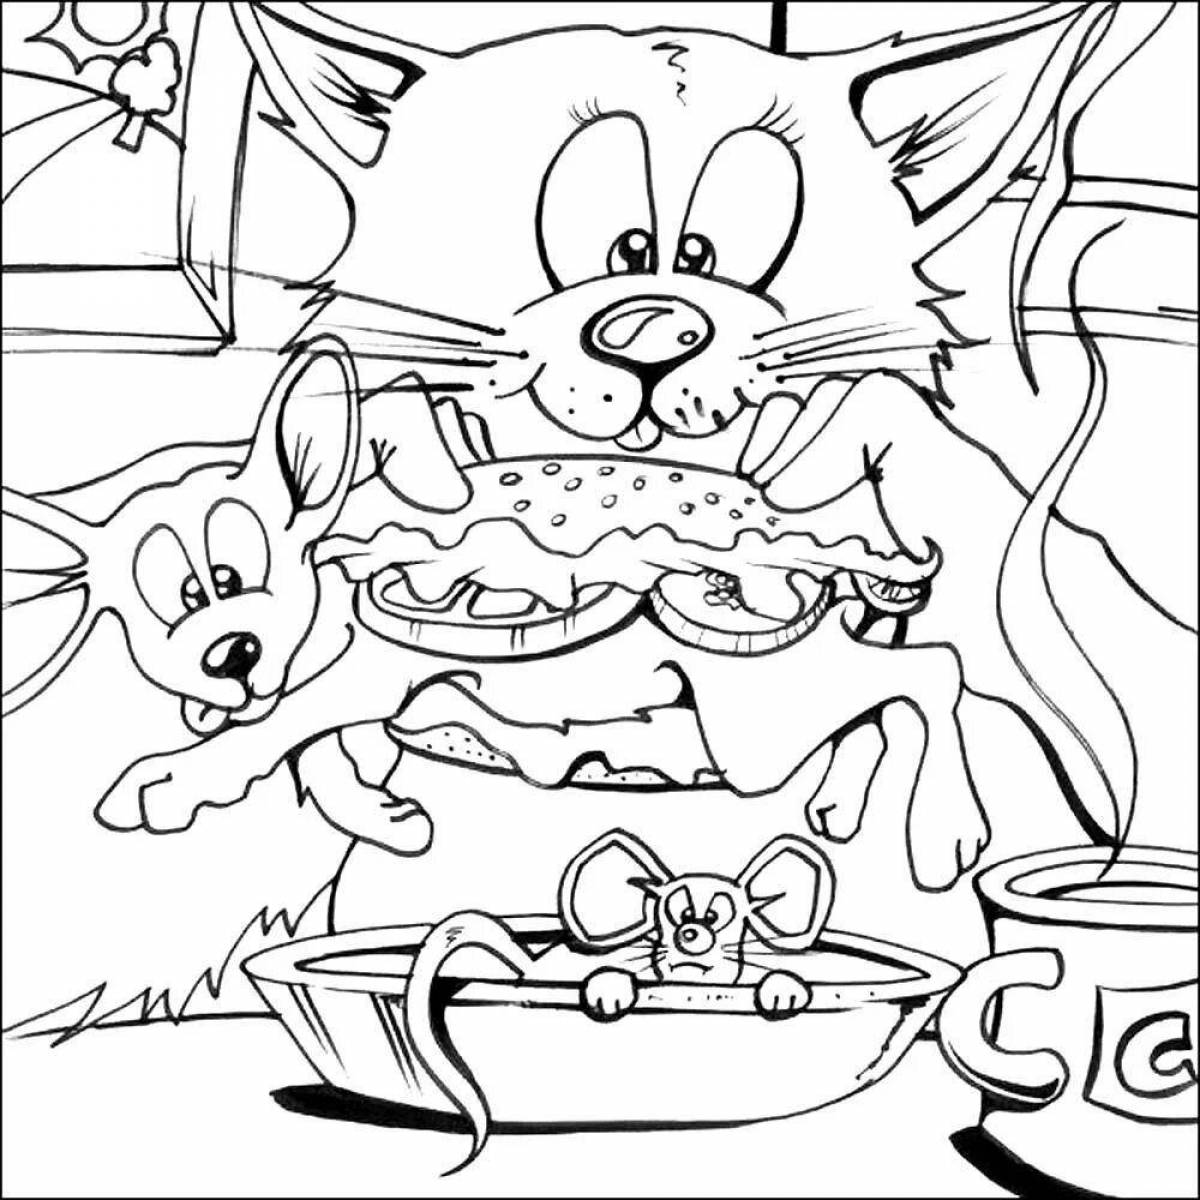 Bright cat and mouse coloring page